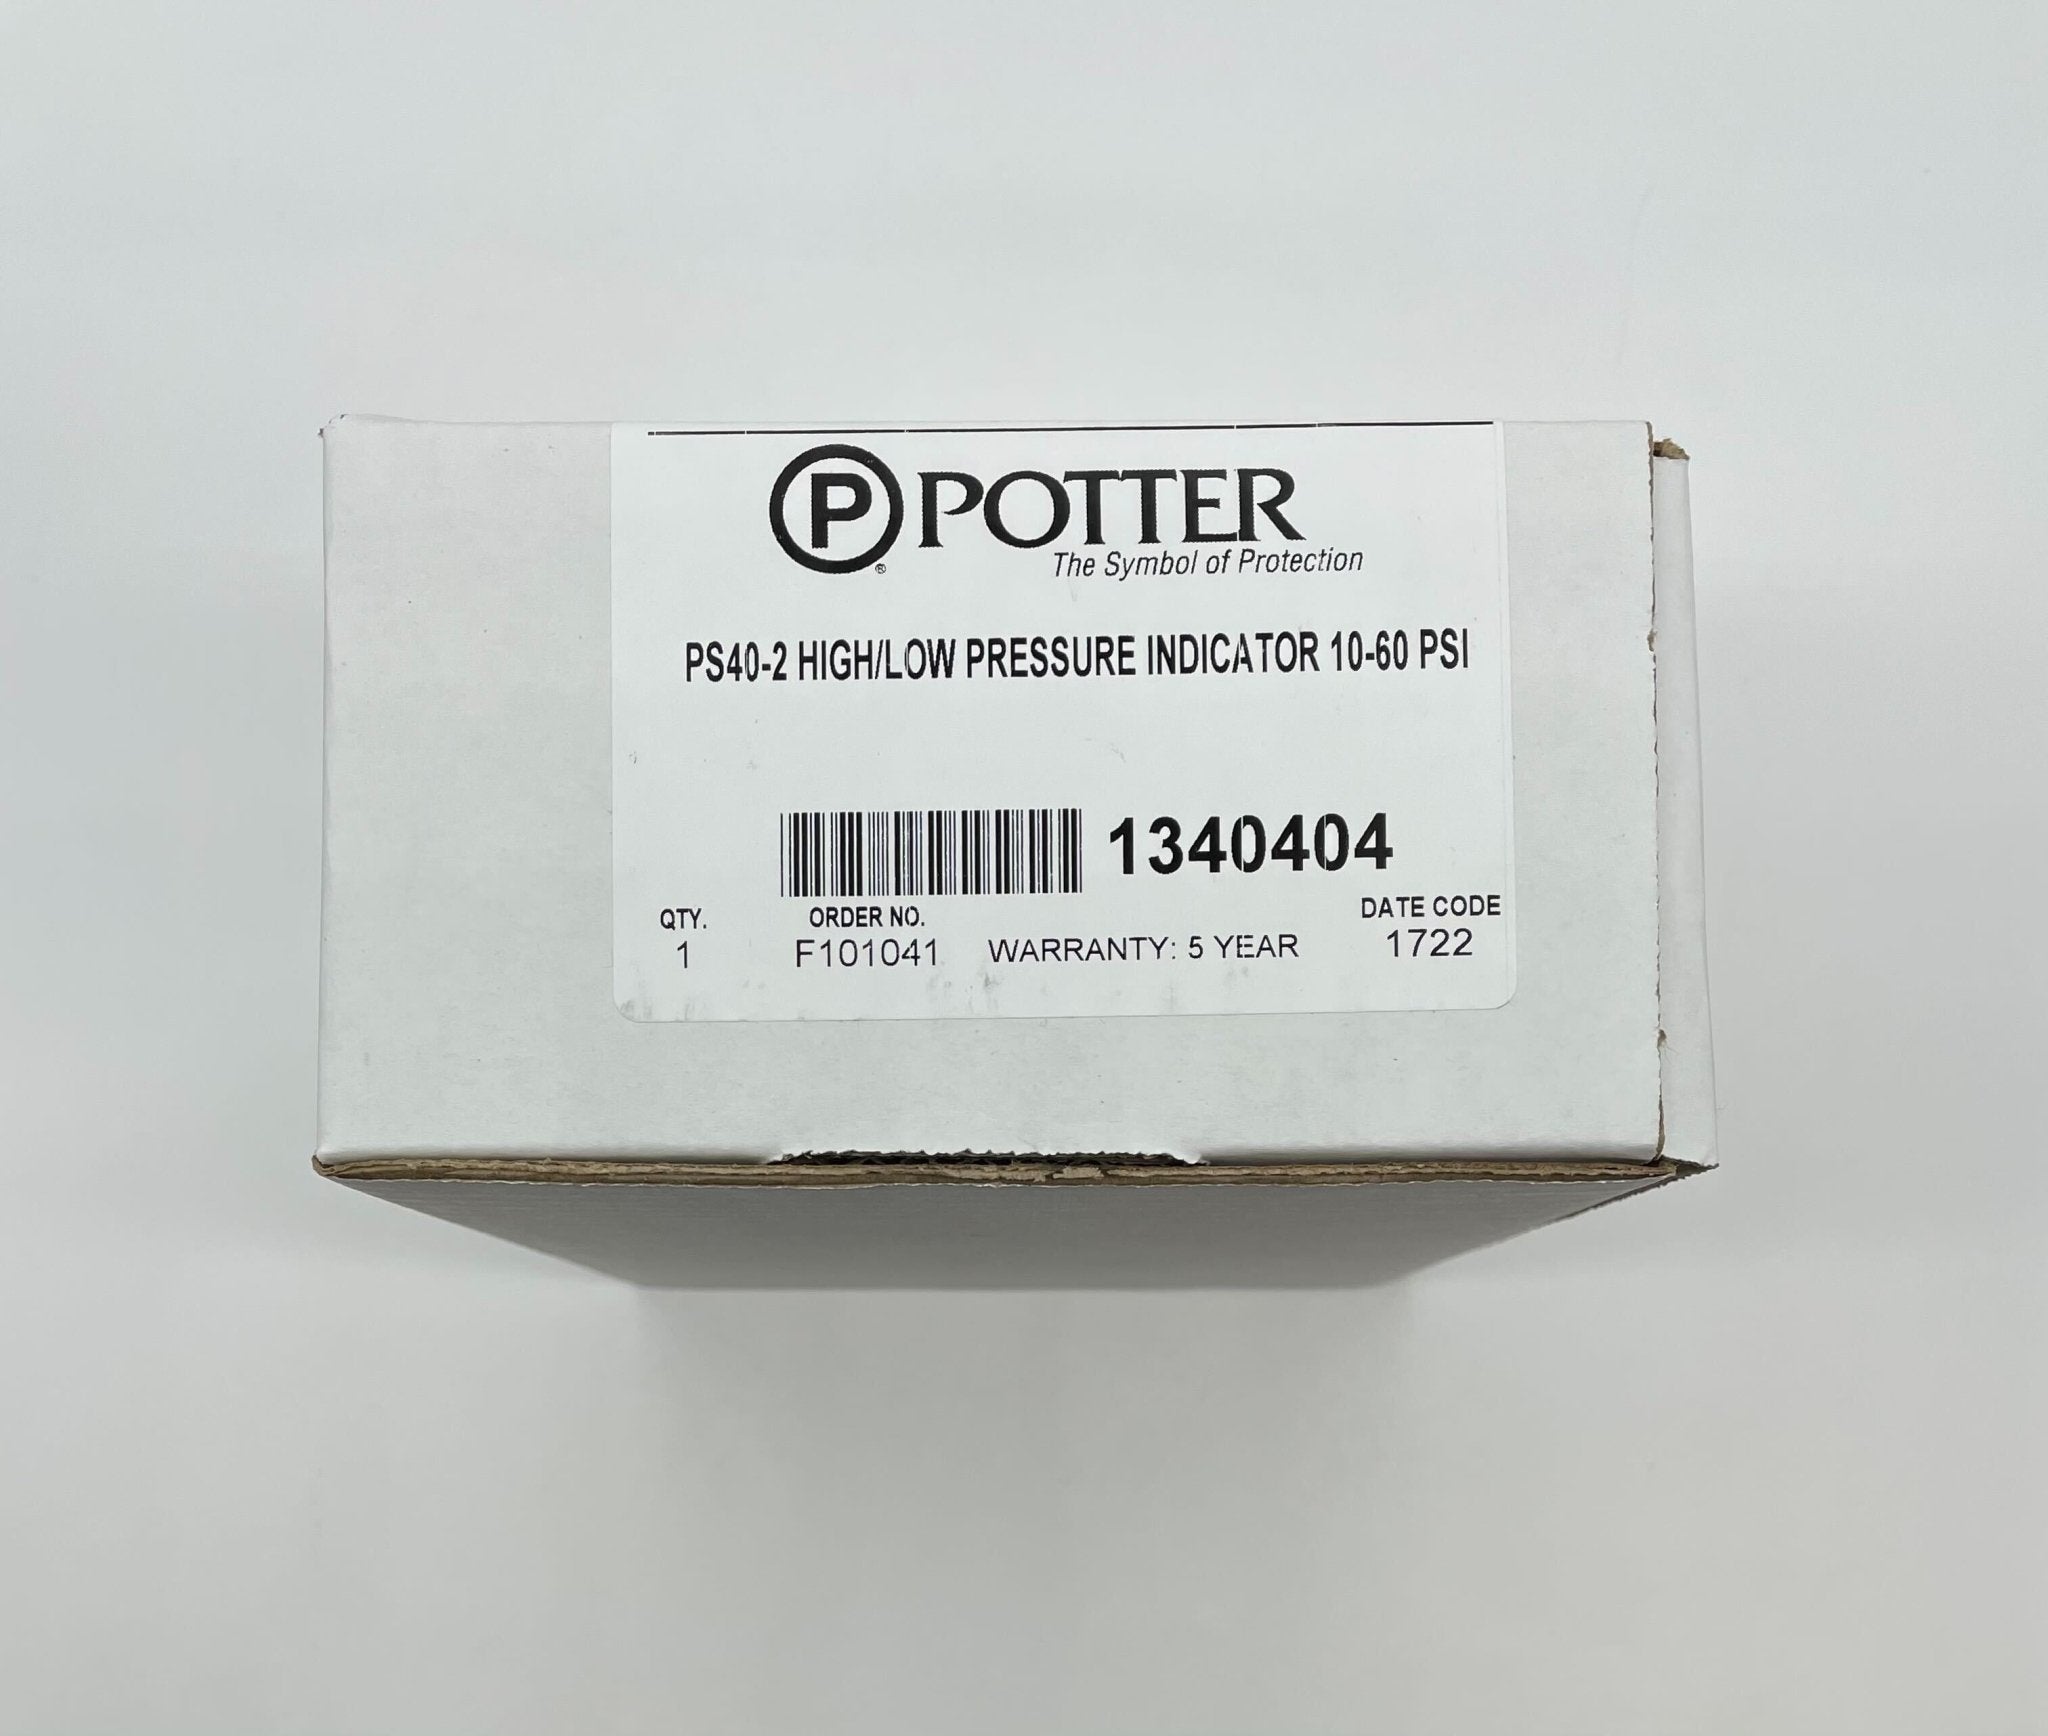 Potter PS40-2 High/Low Pressure Switch - The Fire Alarm Supplier